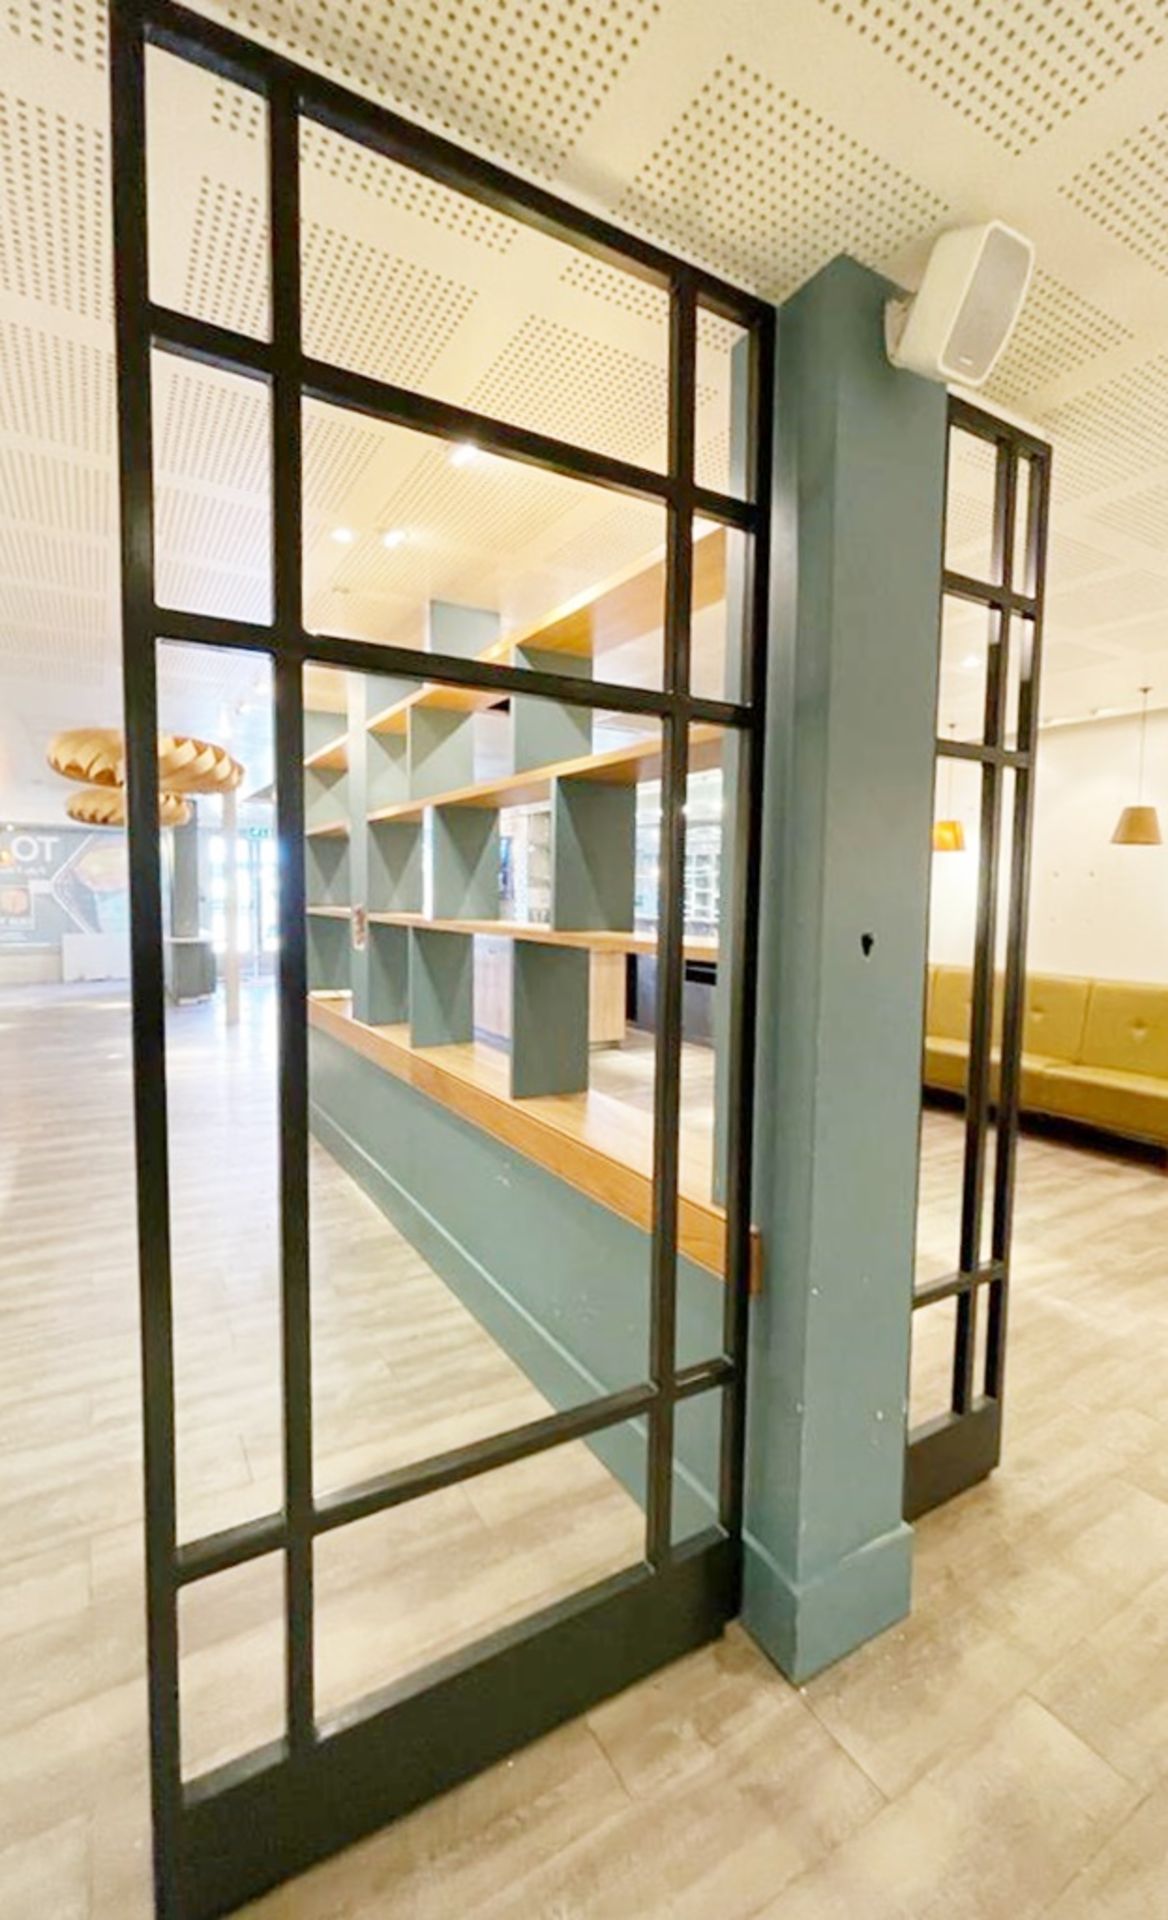 4 x Bespoke Upright Metal Partition Dividers - 4cm Thick Metal - Dimensions: H270 x W58/58/50/112 - Image 10 of 16